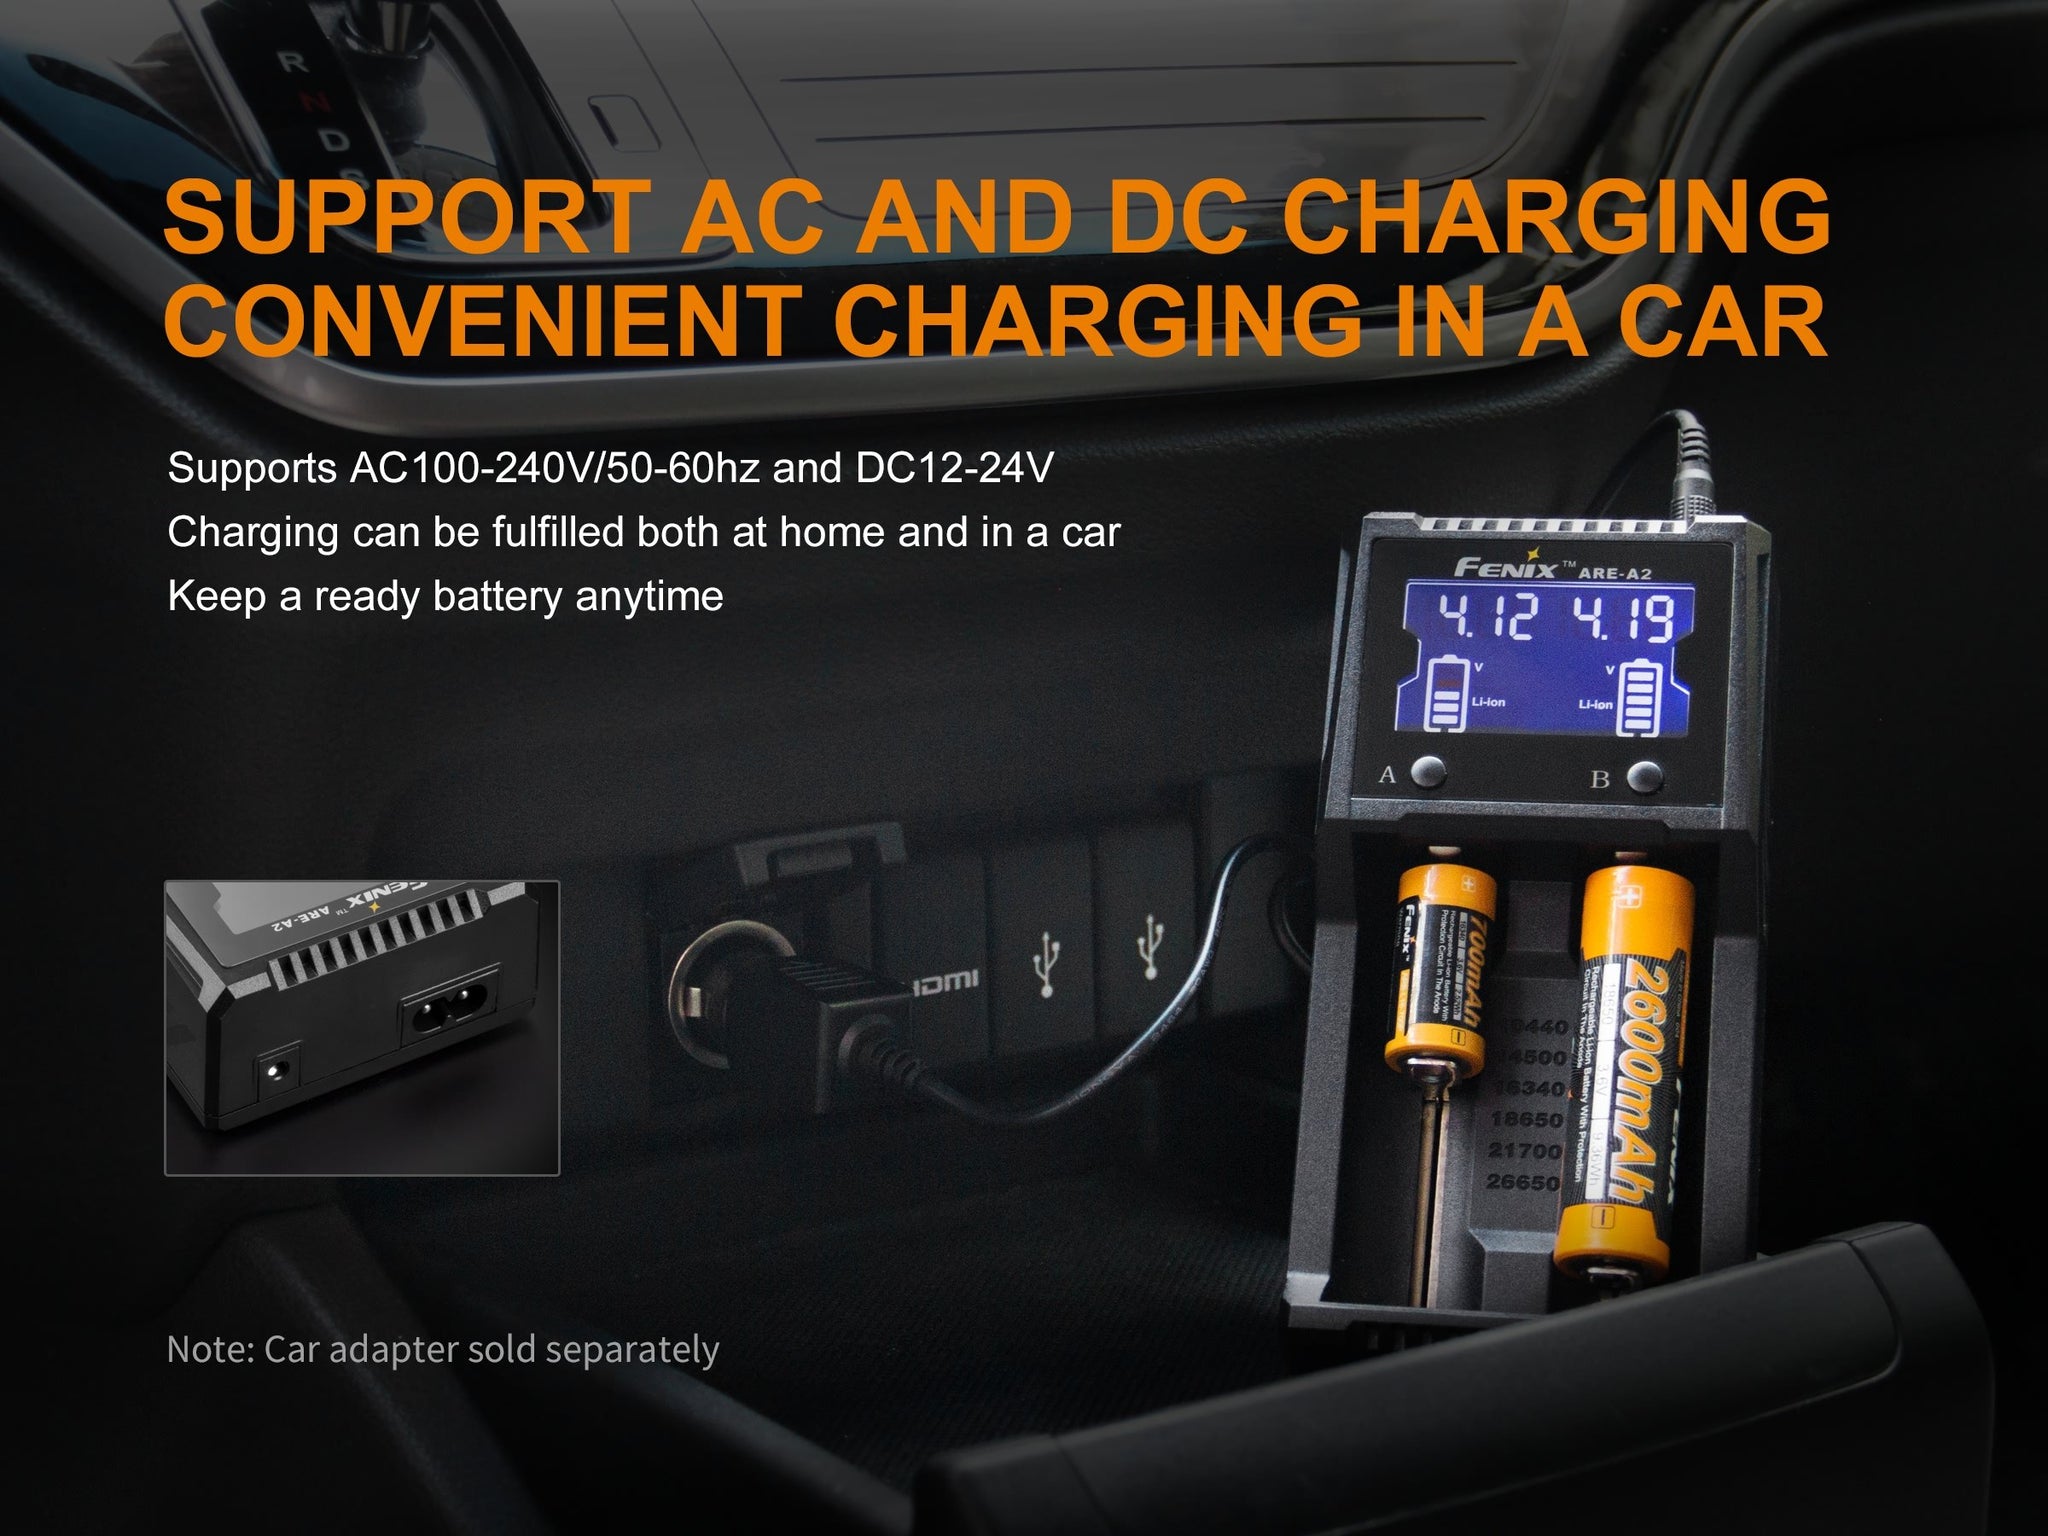 Charger support charging in a car